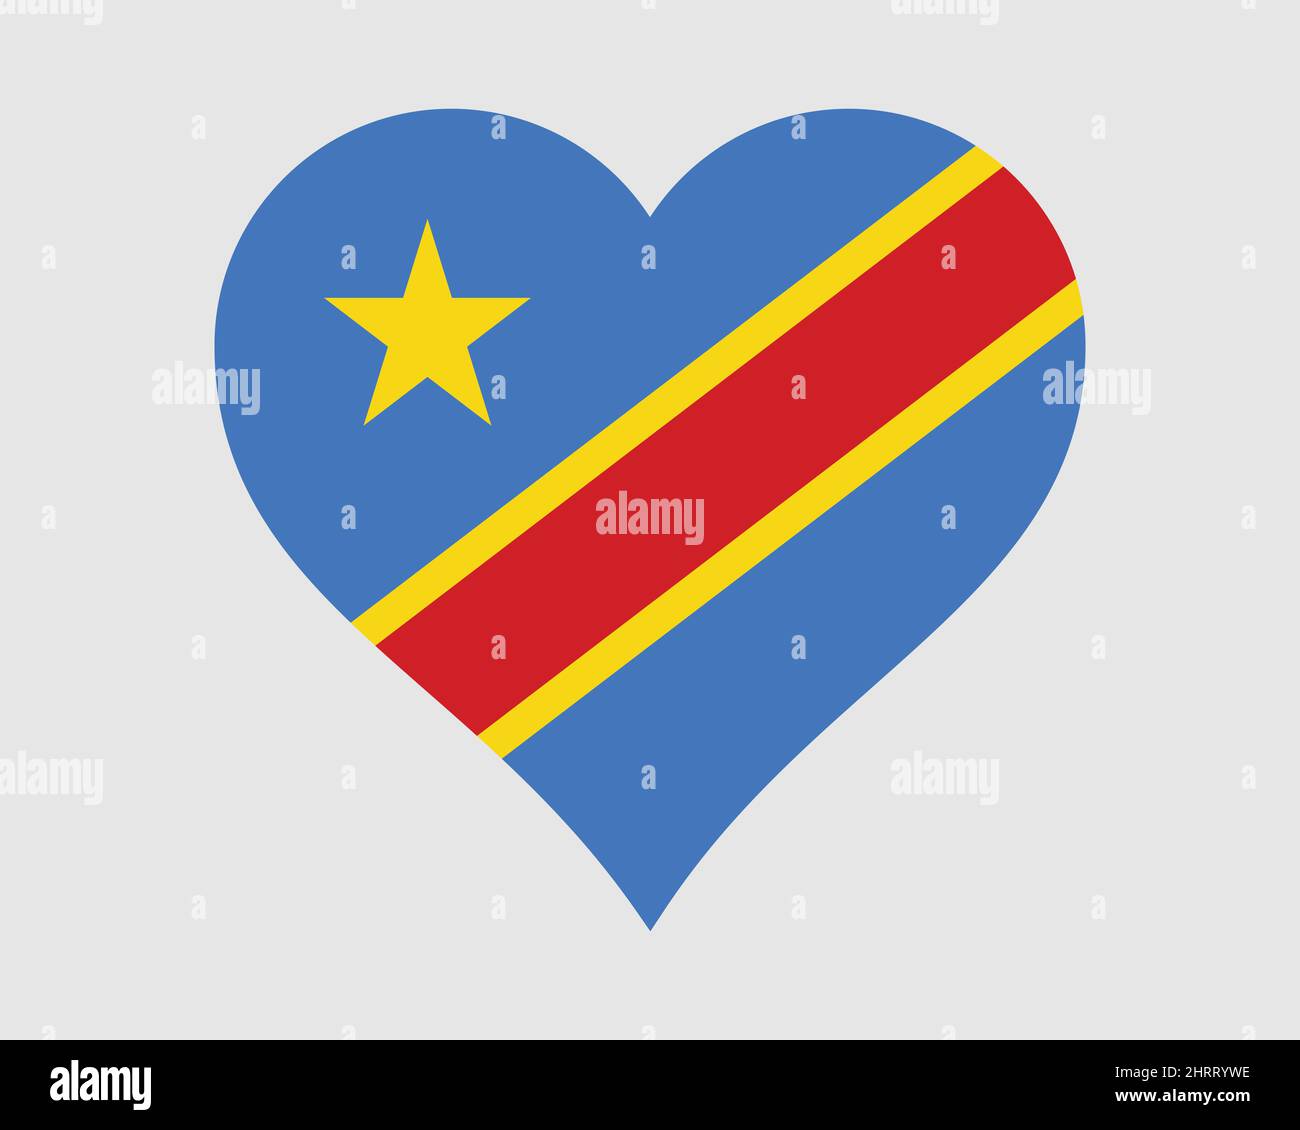 Dr congo heart Stock Vector Images - Alamy